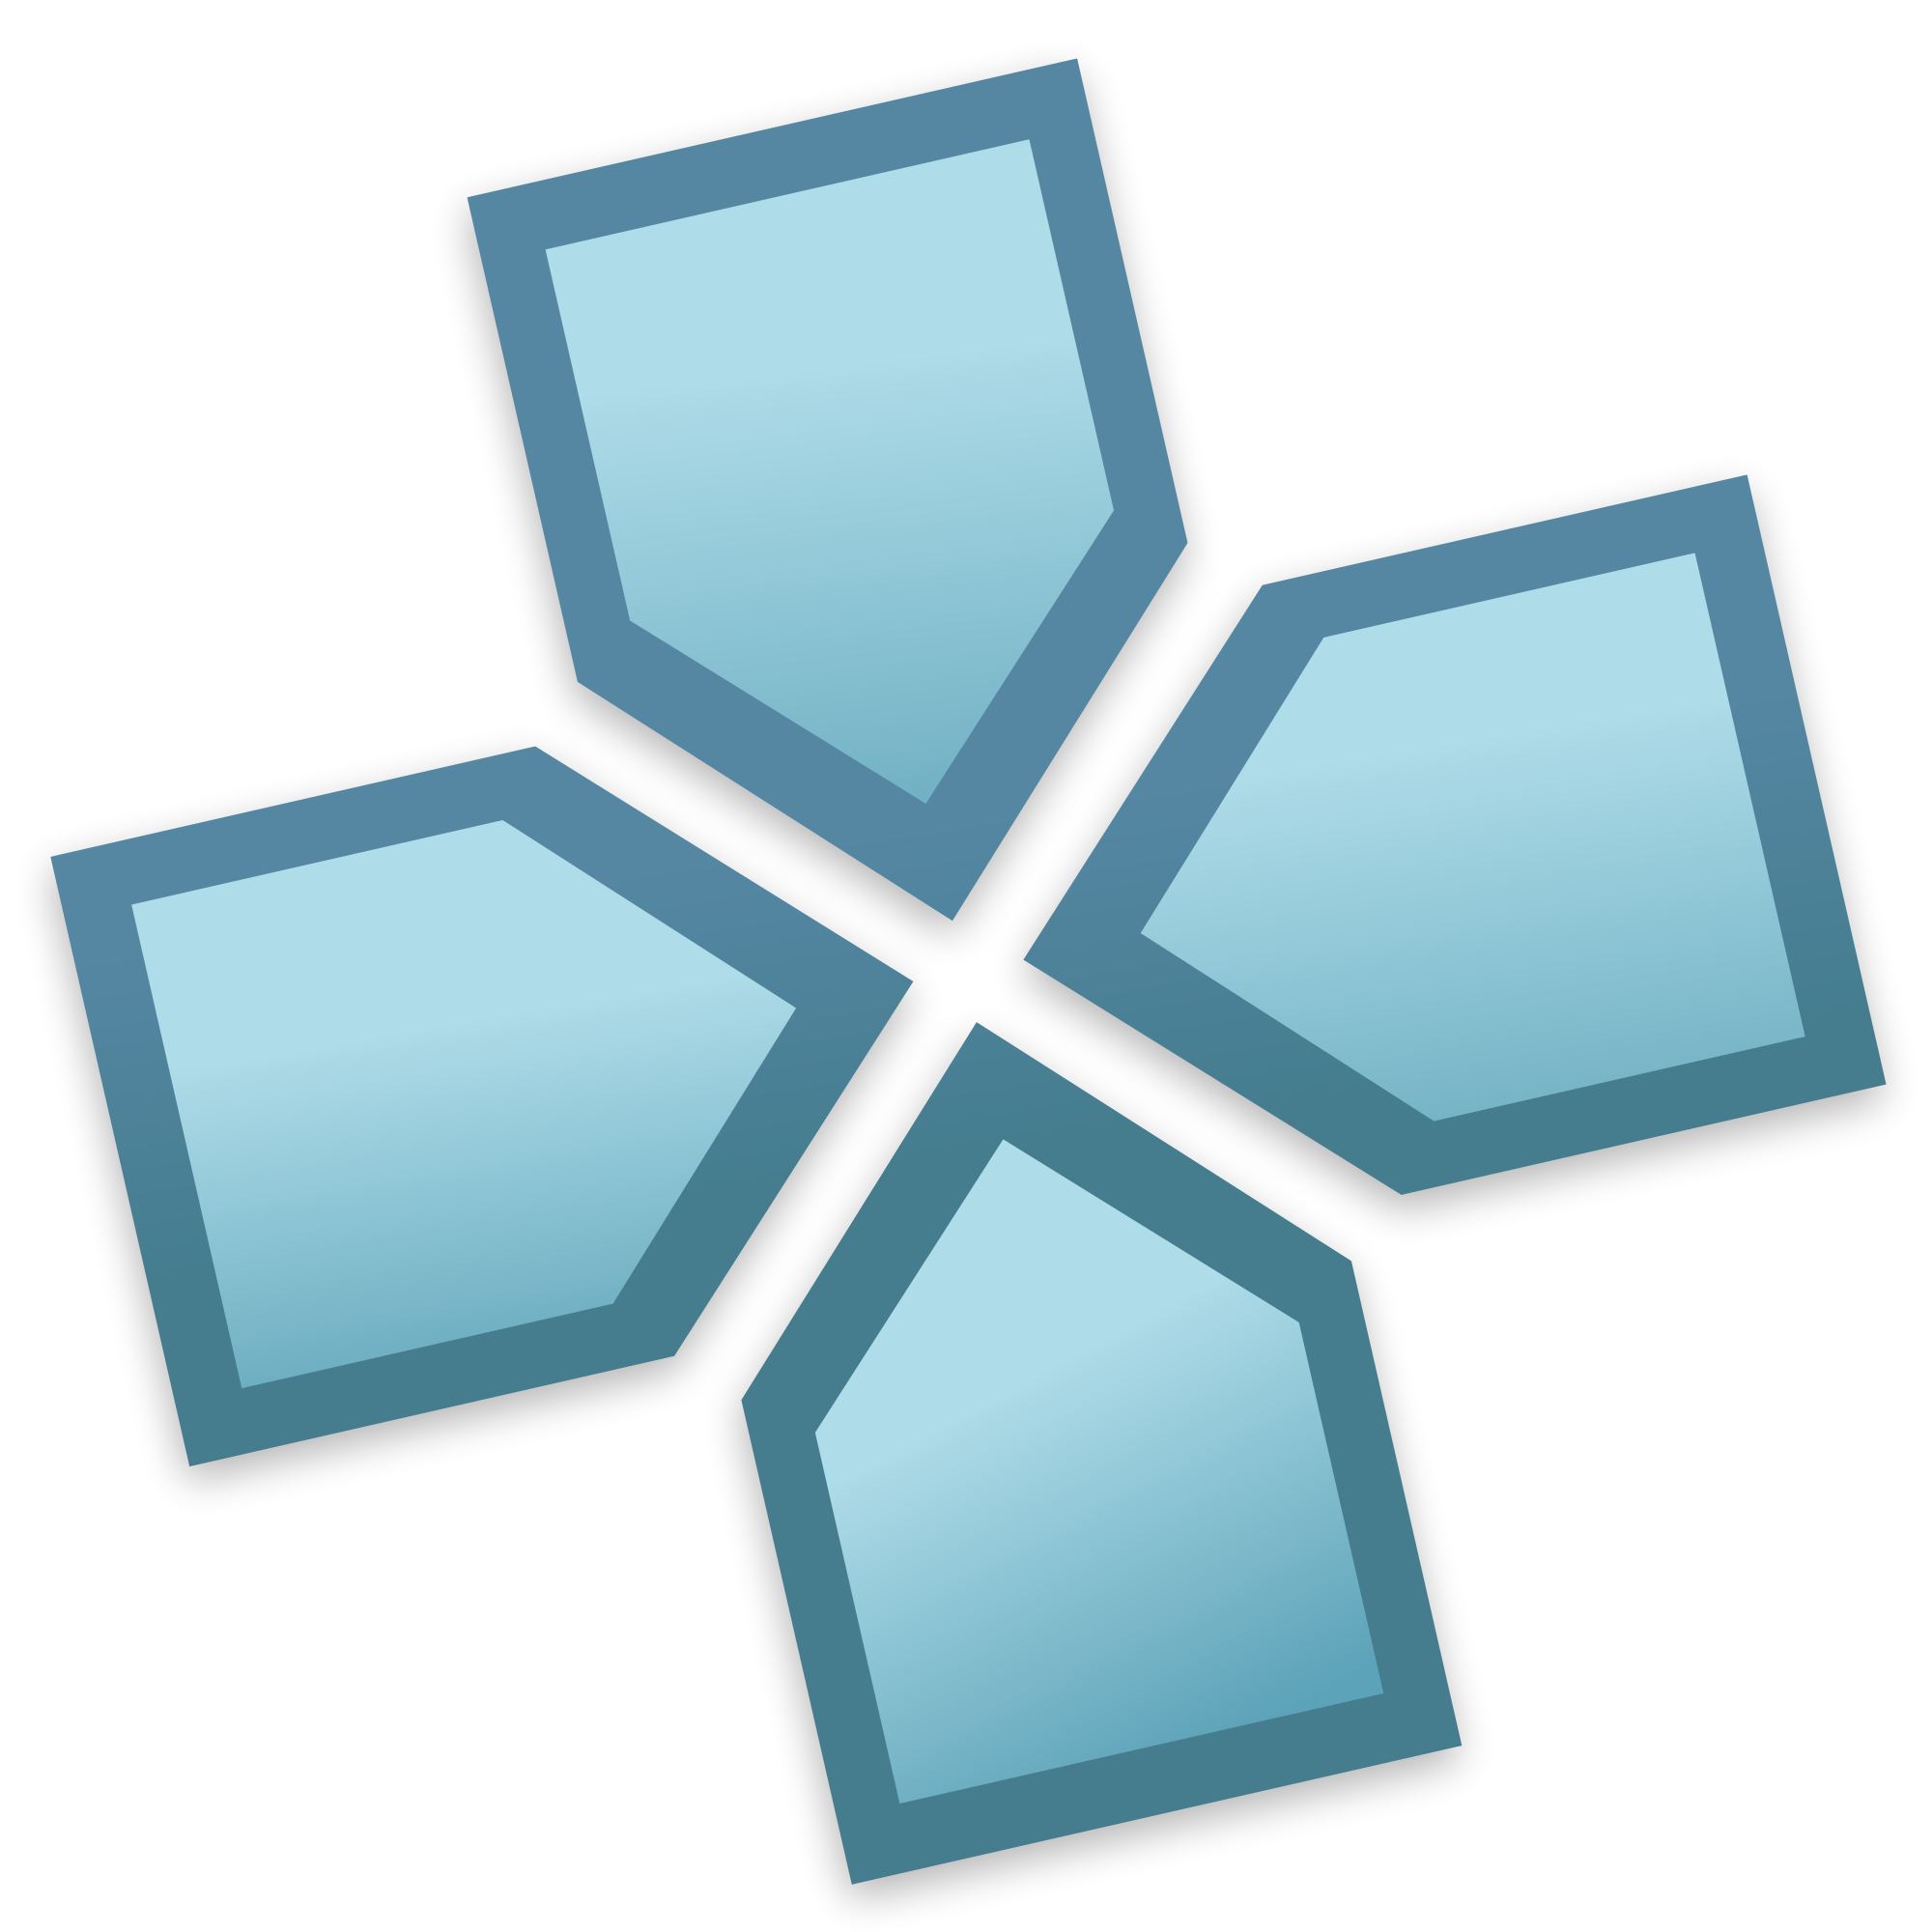 2000px-PPSSPP_logo.svg.png